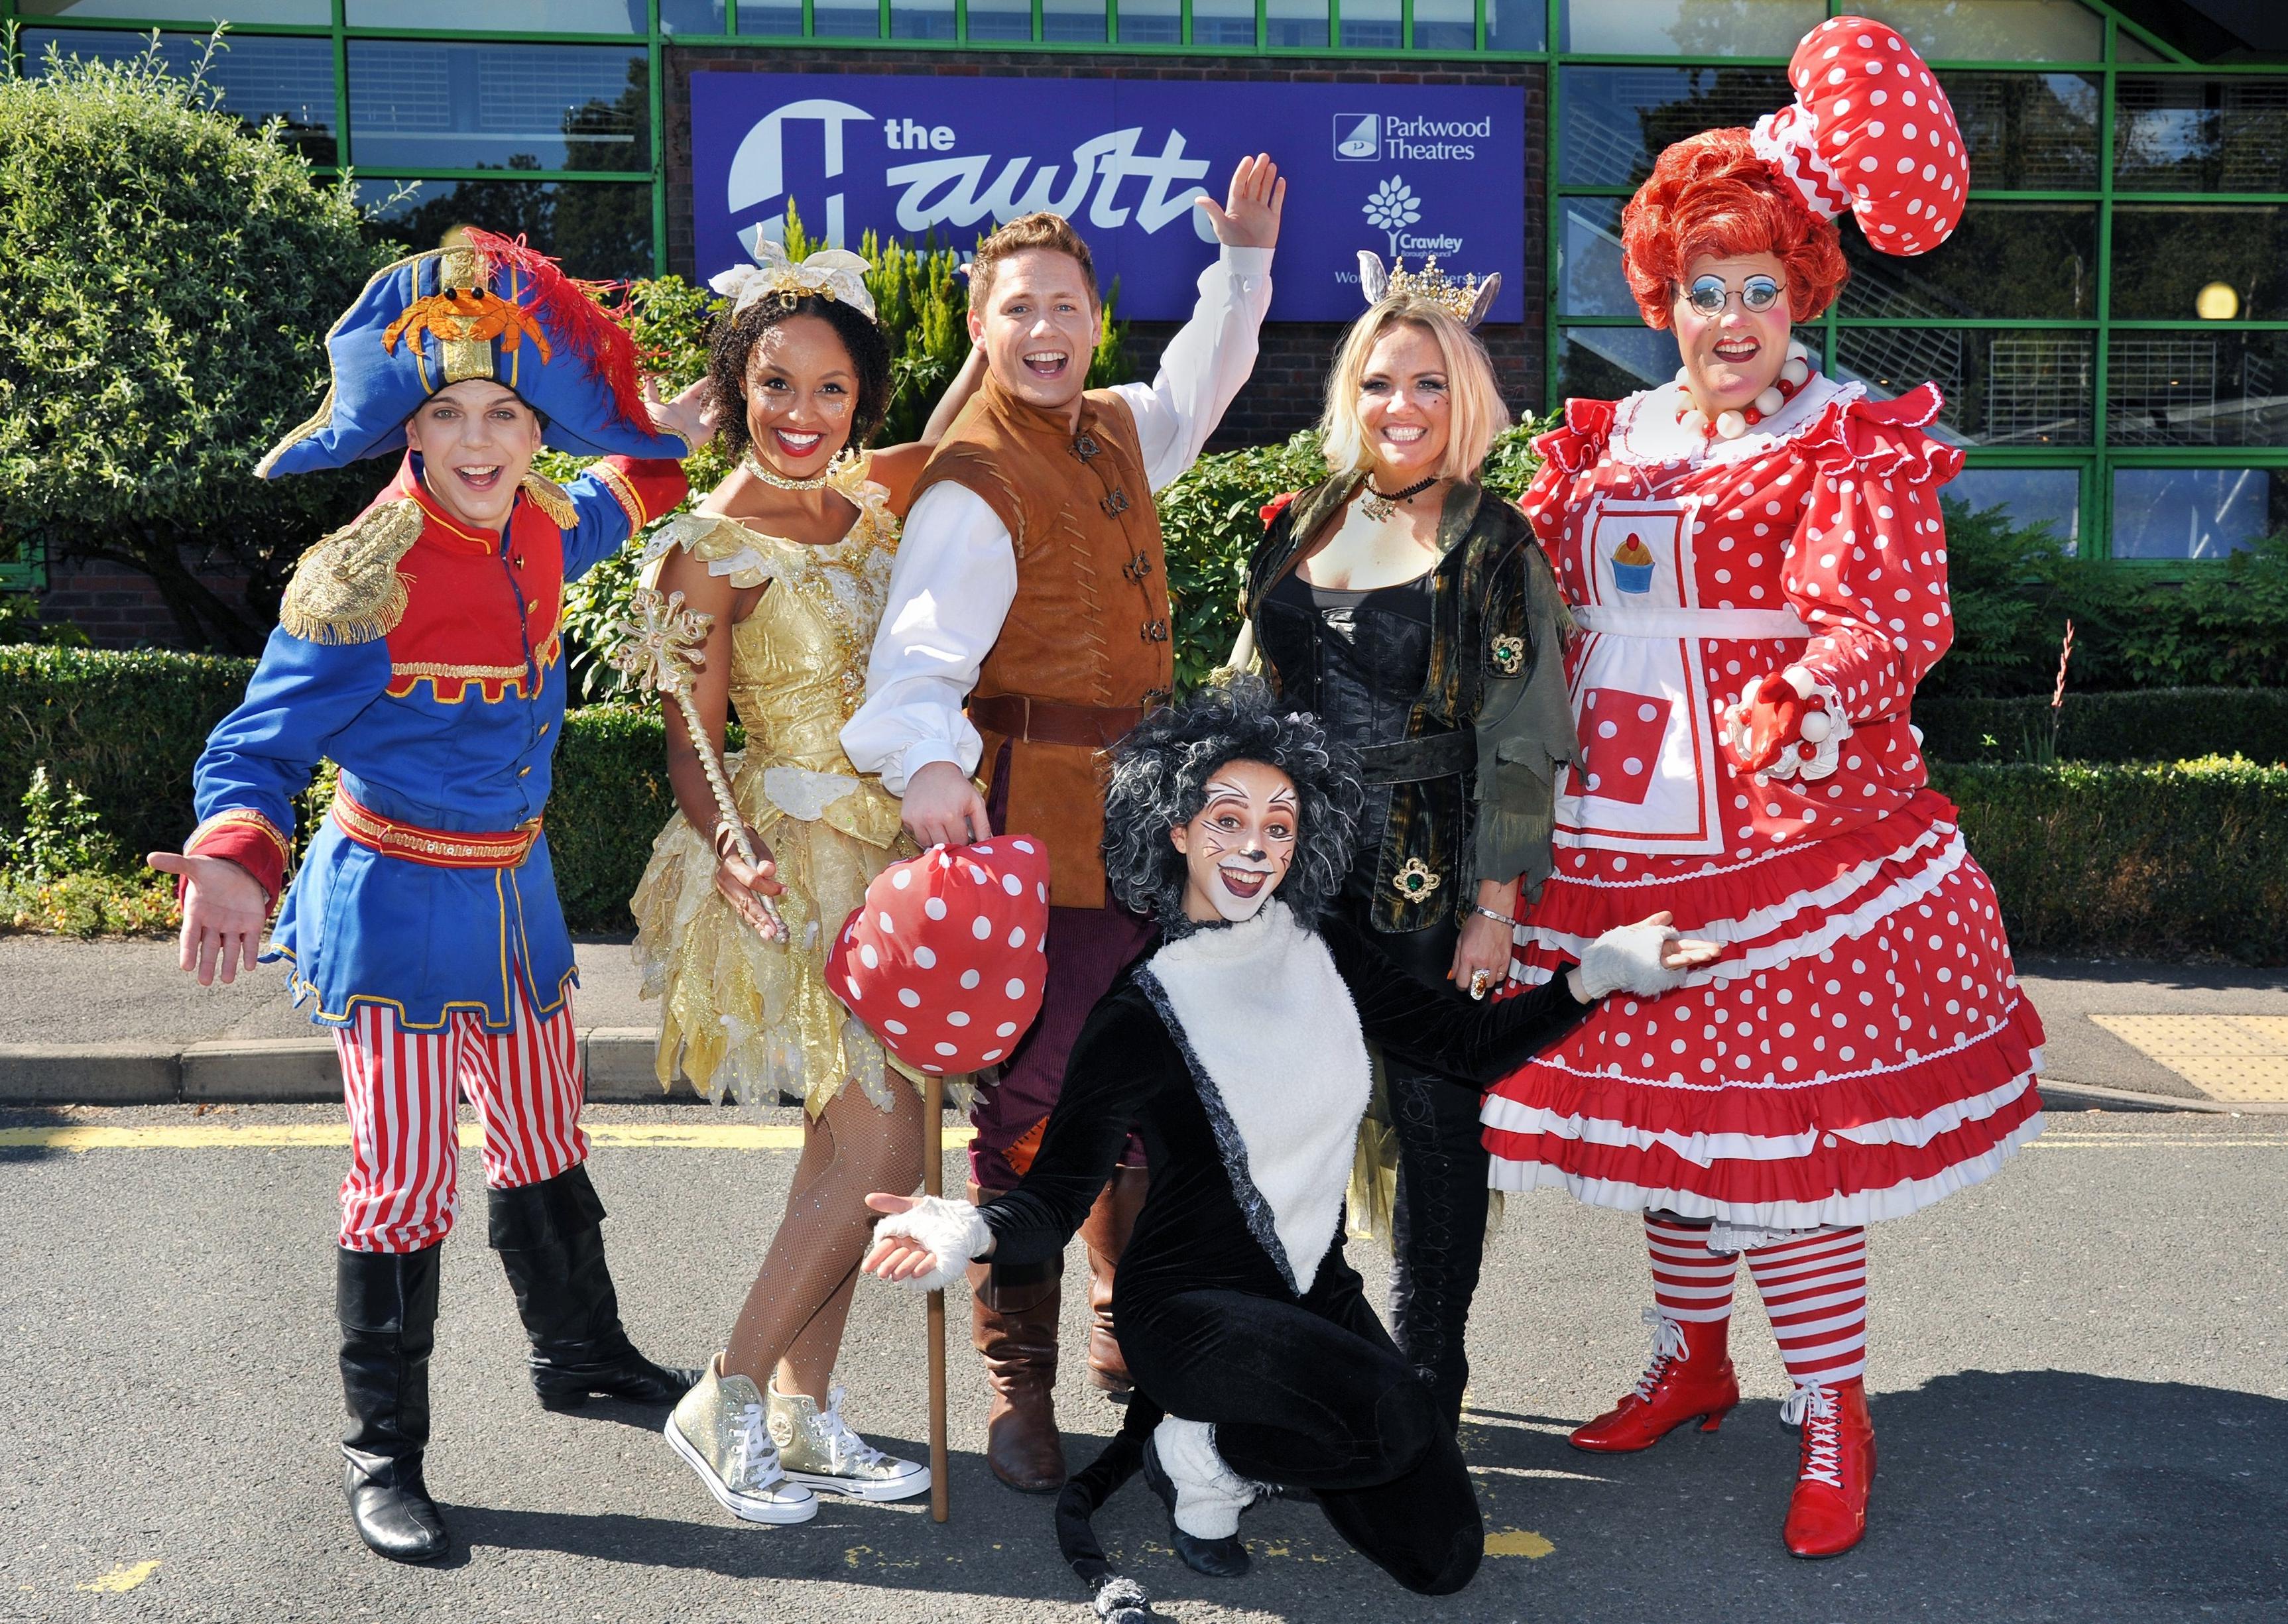 Dick Whittington is on at the Hawth Theatre, Hawth Avenue, Crawley from December 6 2019 to January 5 2020.